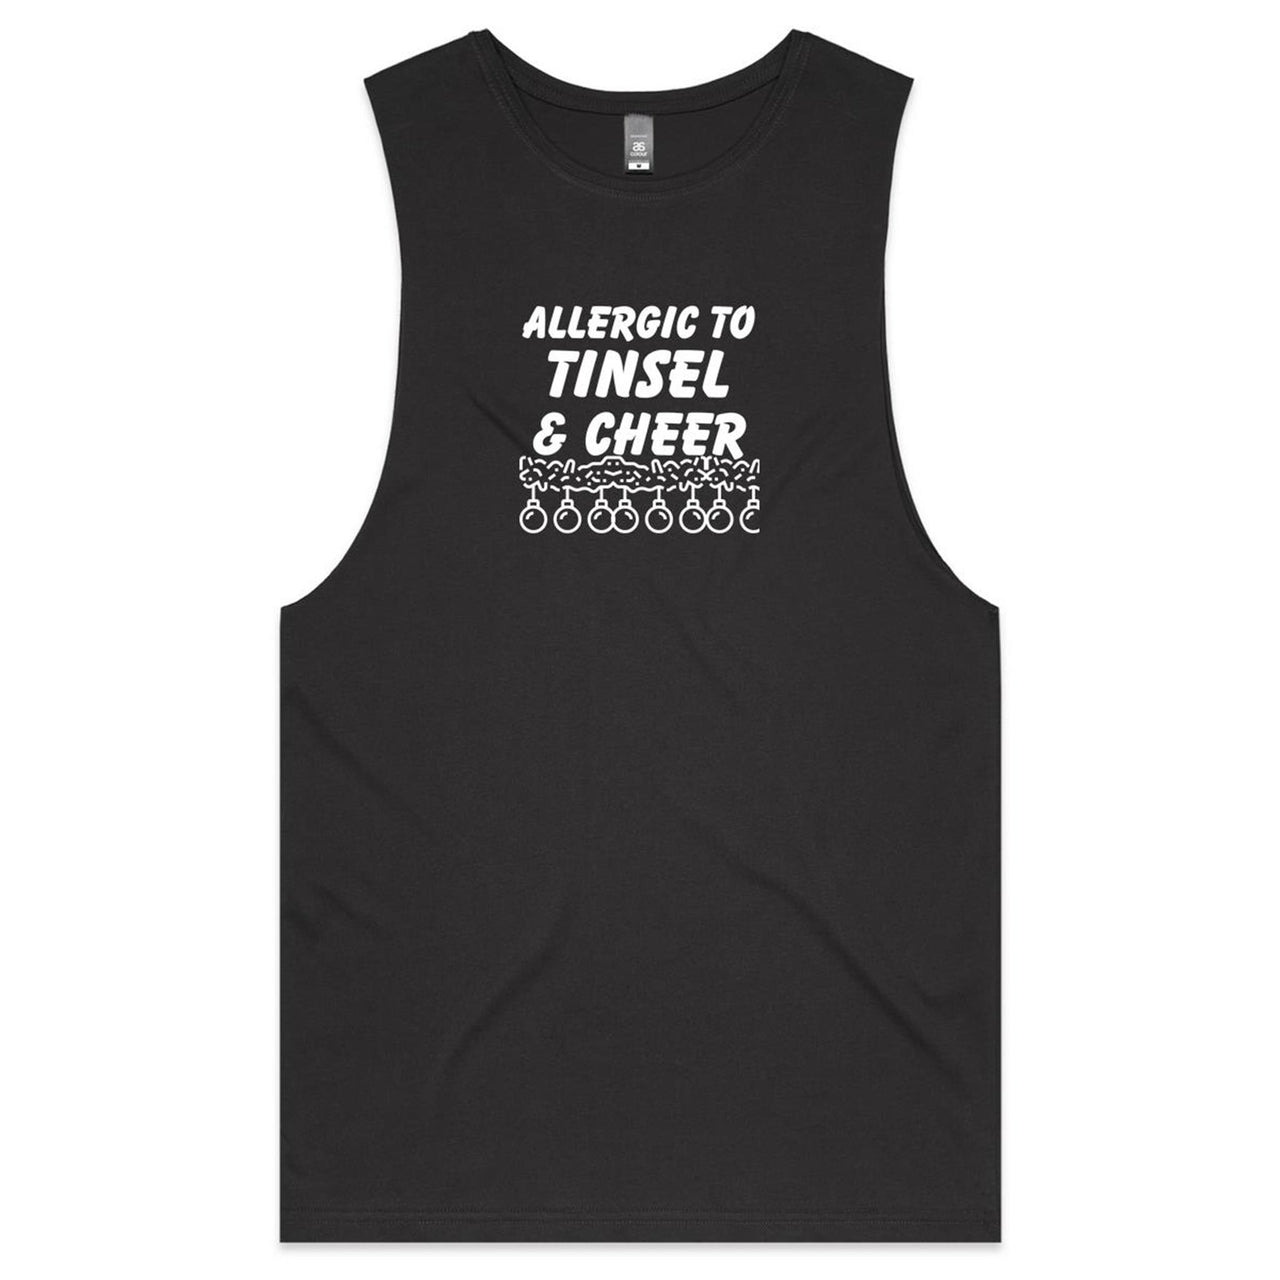 CBF Allergic to Tinsel and Cheer Christmas Tank Top Tee black